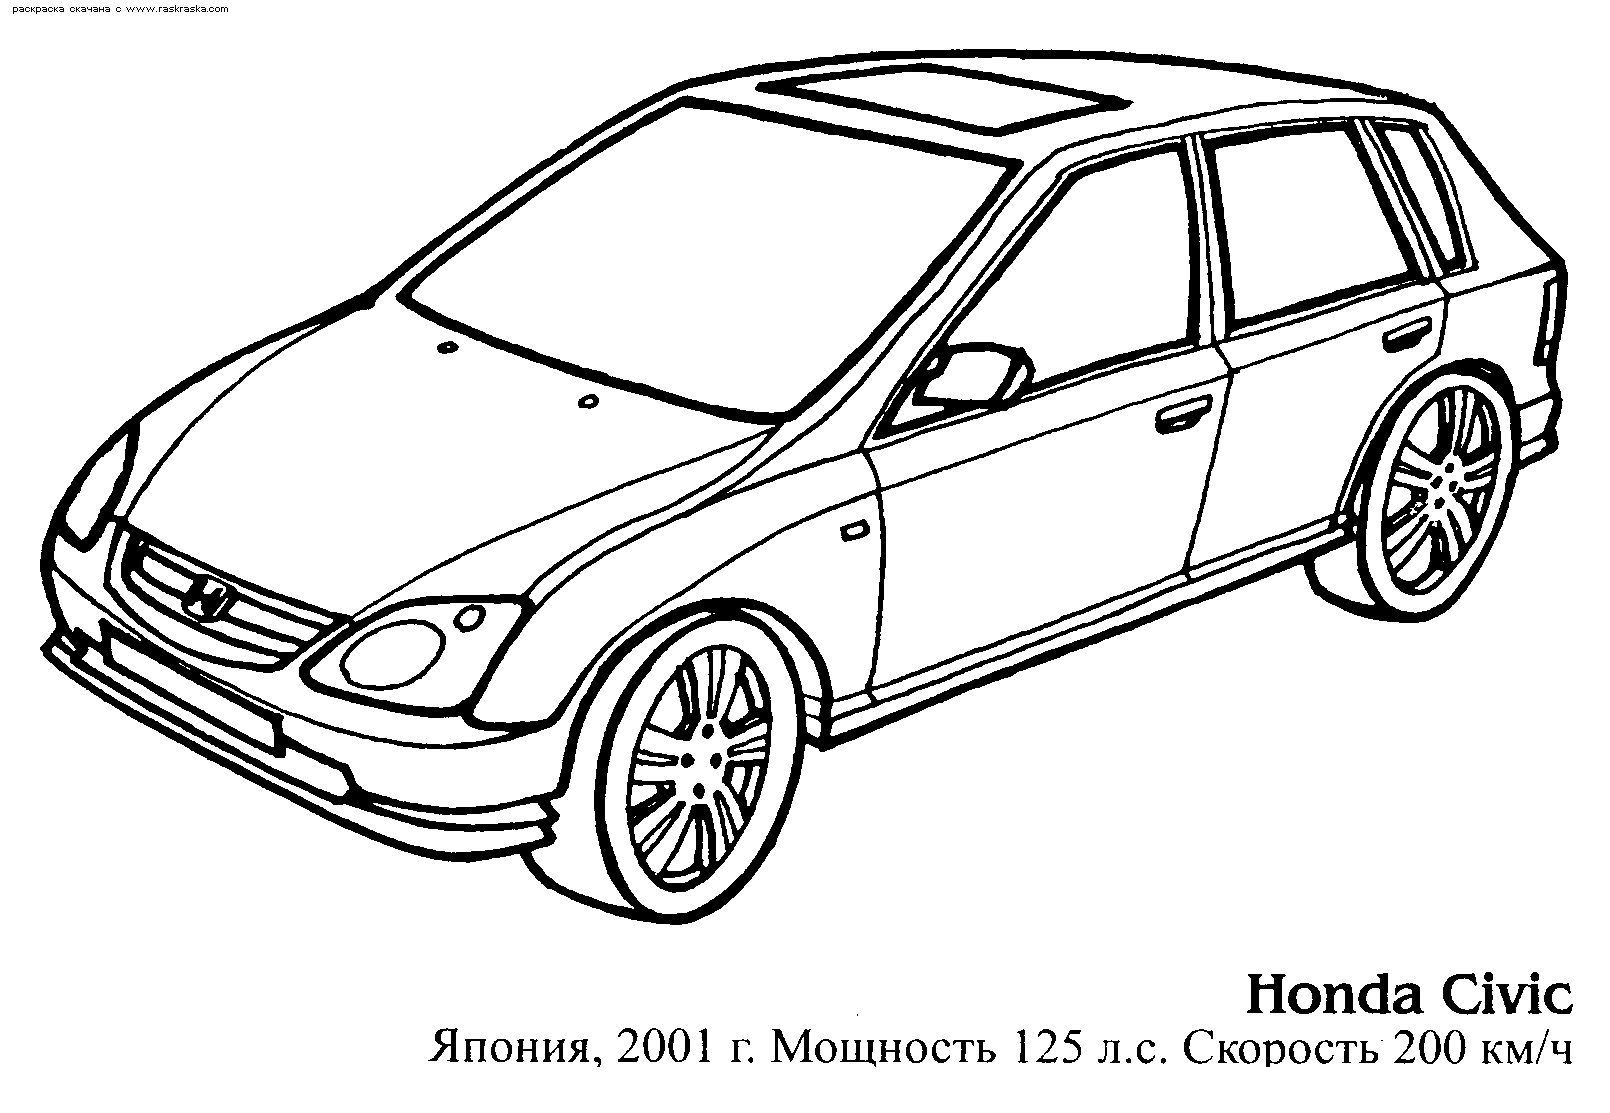 Old Honda CARS Coloring Pages | Kids Coloring pages